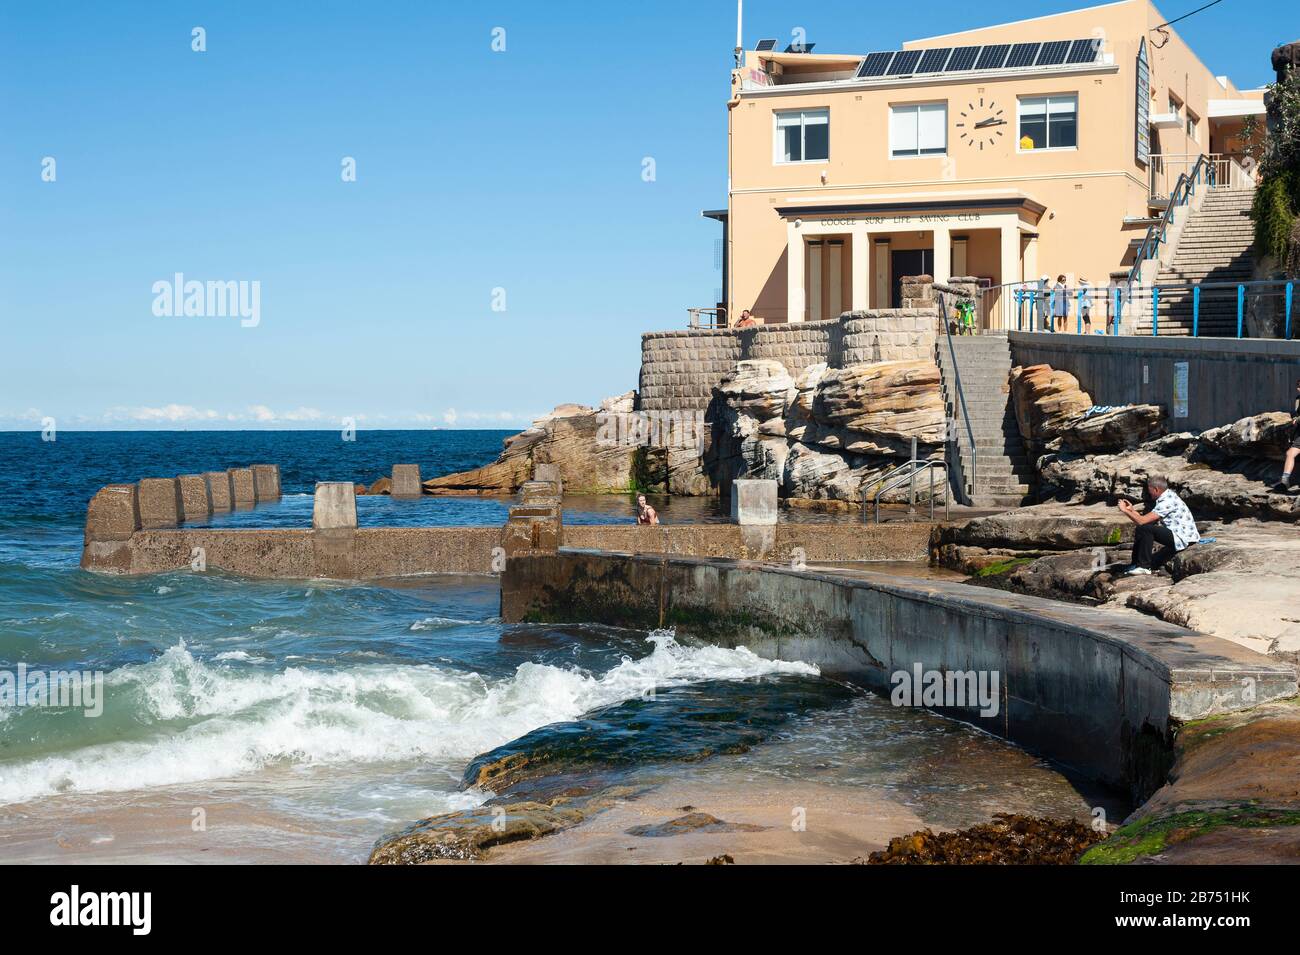 24.09.2019, Sydney, New South Wales, Australia - Ross Jones Memorial Pool Swimming Pool at the beach of Coogee Beach. Next to it is the building of the Coogee Surf Life Saving Club. [automated translation] Stock Photo